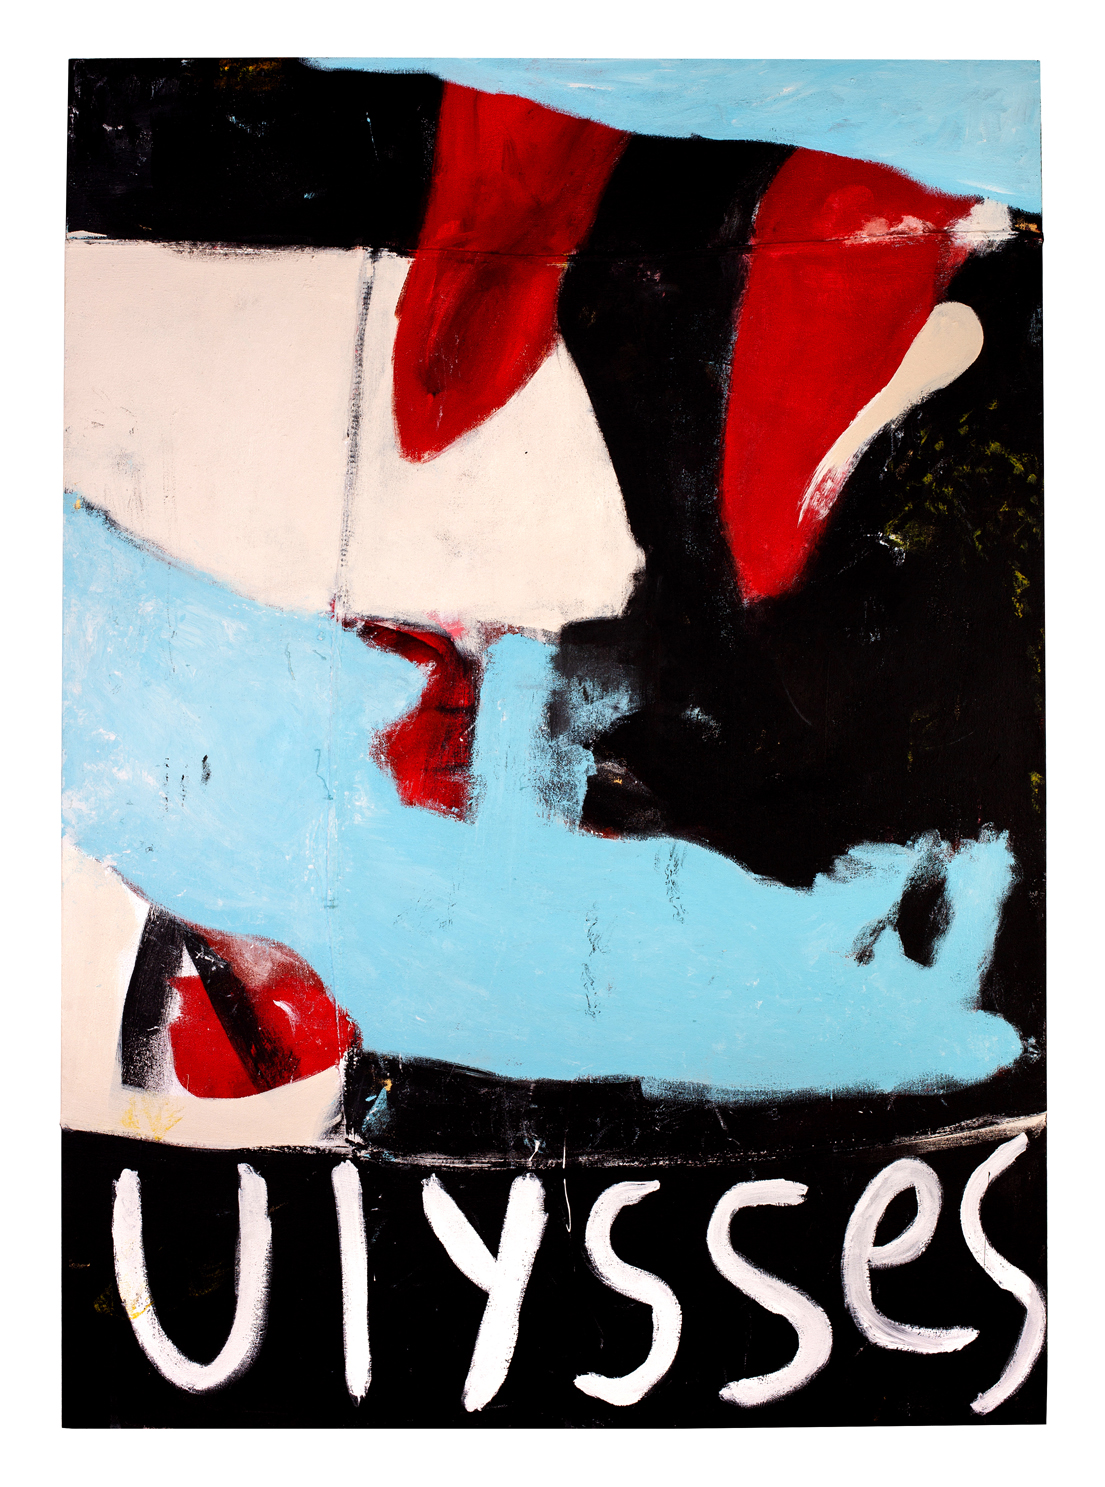 4 Ulysses 2019 mixed media on canvas 56 x 40in